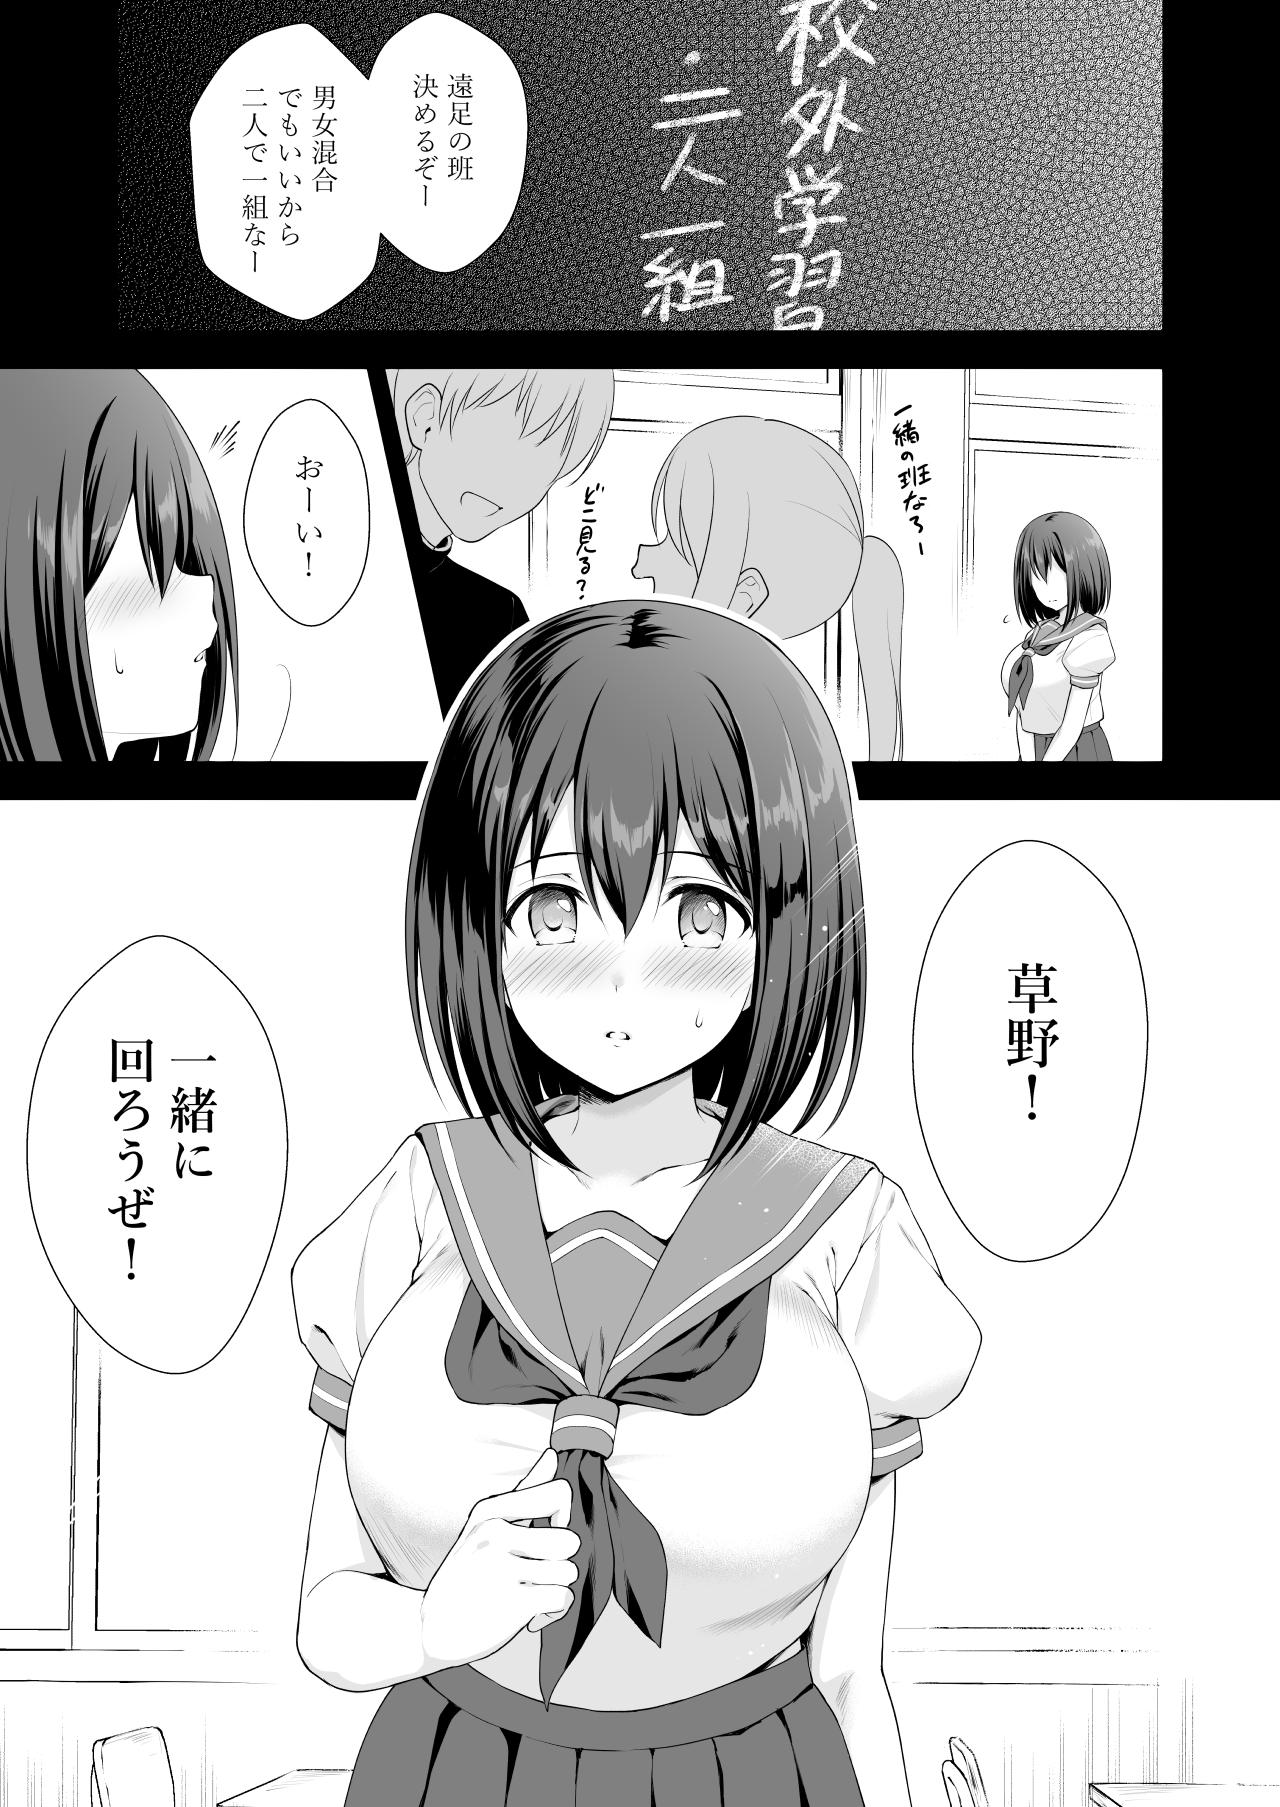 The 優衣コネ - Princess connect Spa - Page 3